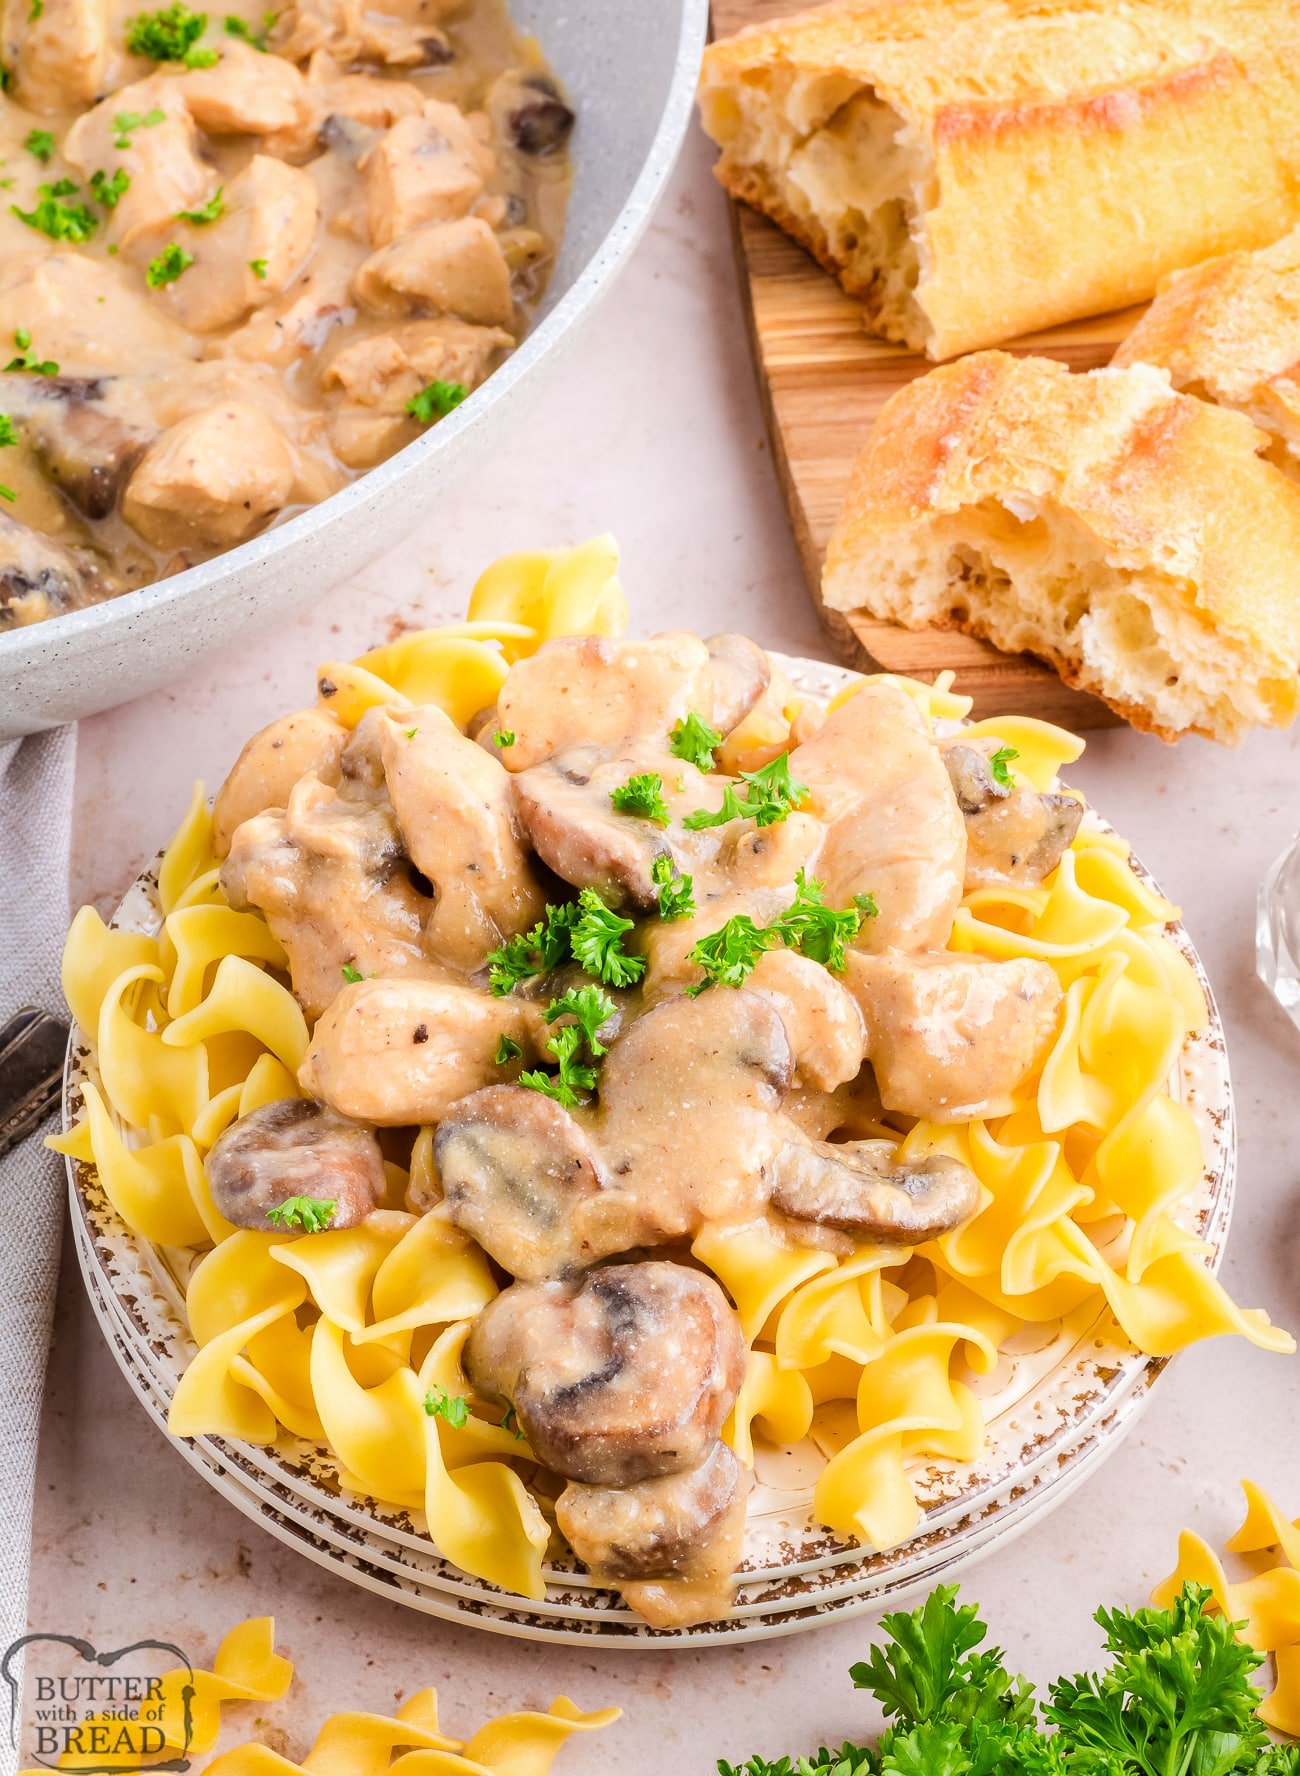 chicken stroganoff made at home served on a plate of noodles